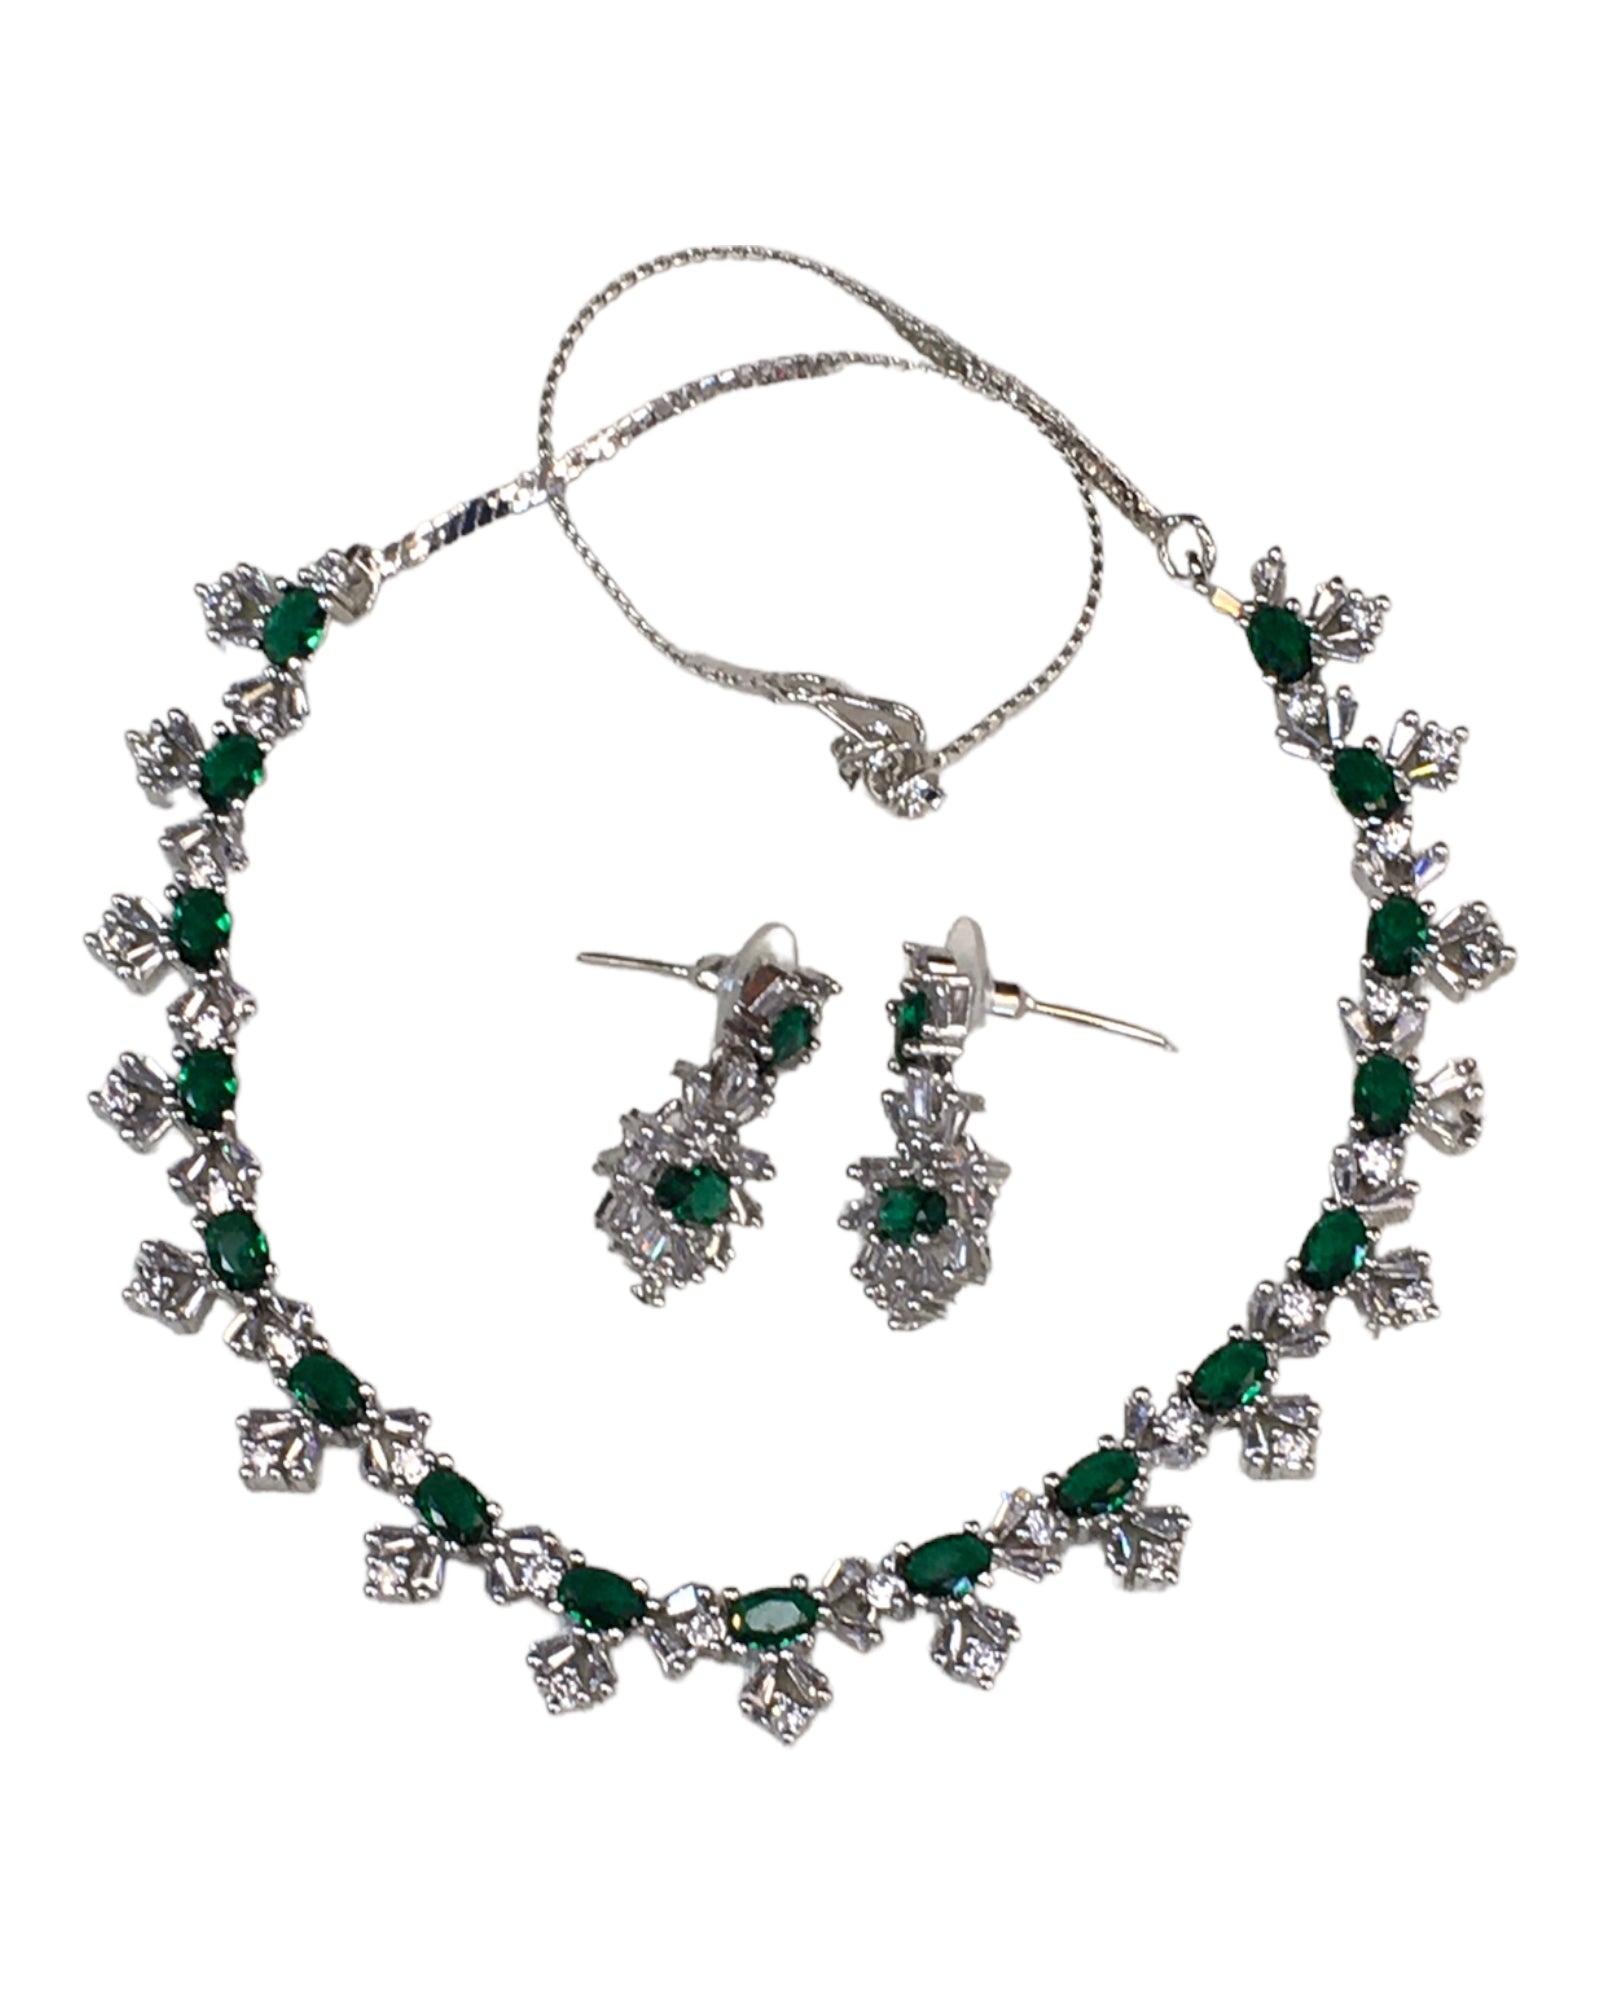 Green - AD Silver Finish  Small Size Necklace Set with Earrings - PMJ11 C 0223